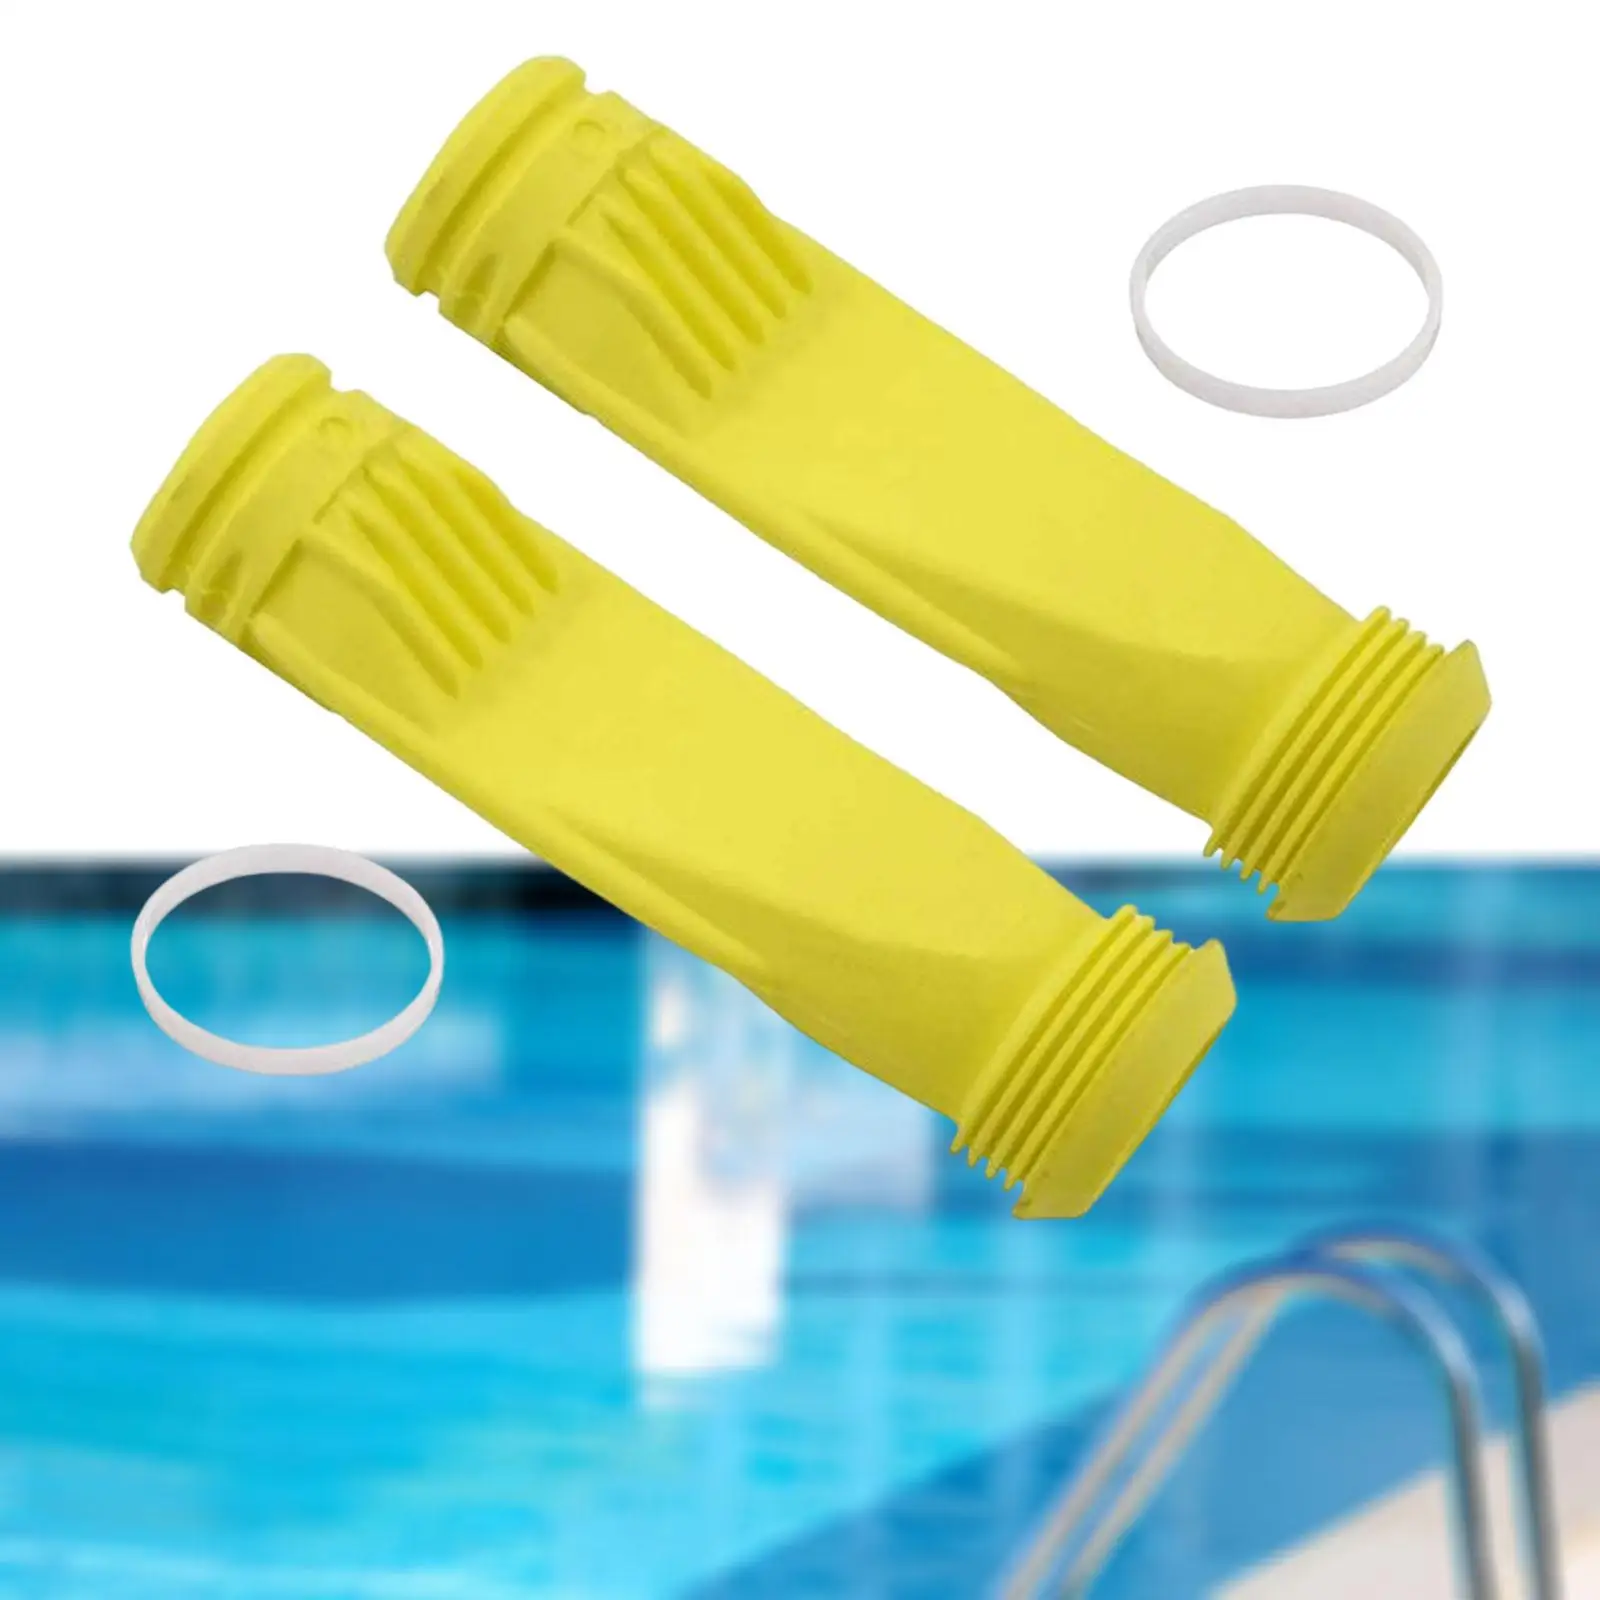 2x Pool Cleaner Diaphragm Long Life Replaces Accessories with